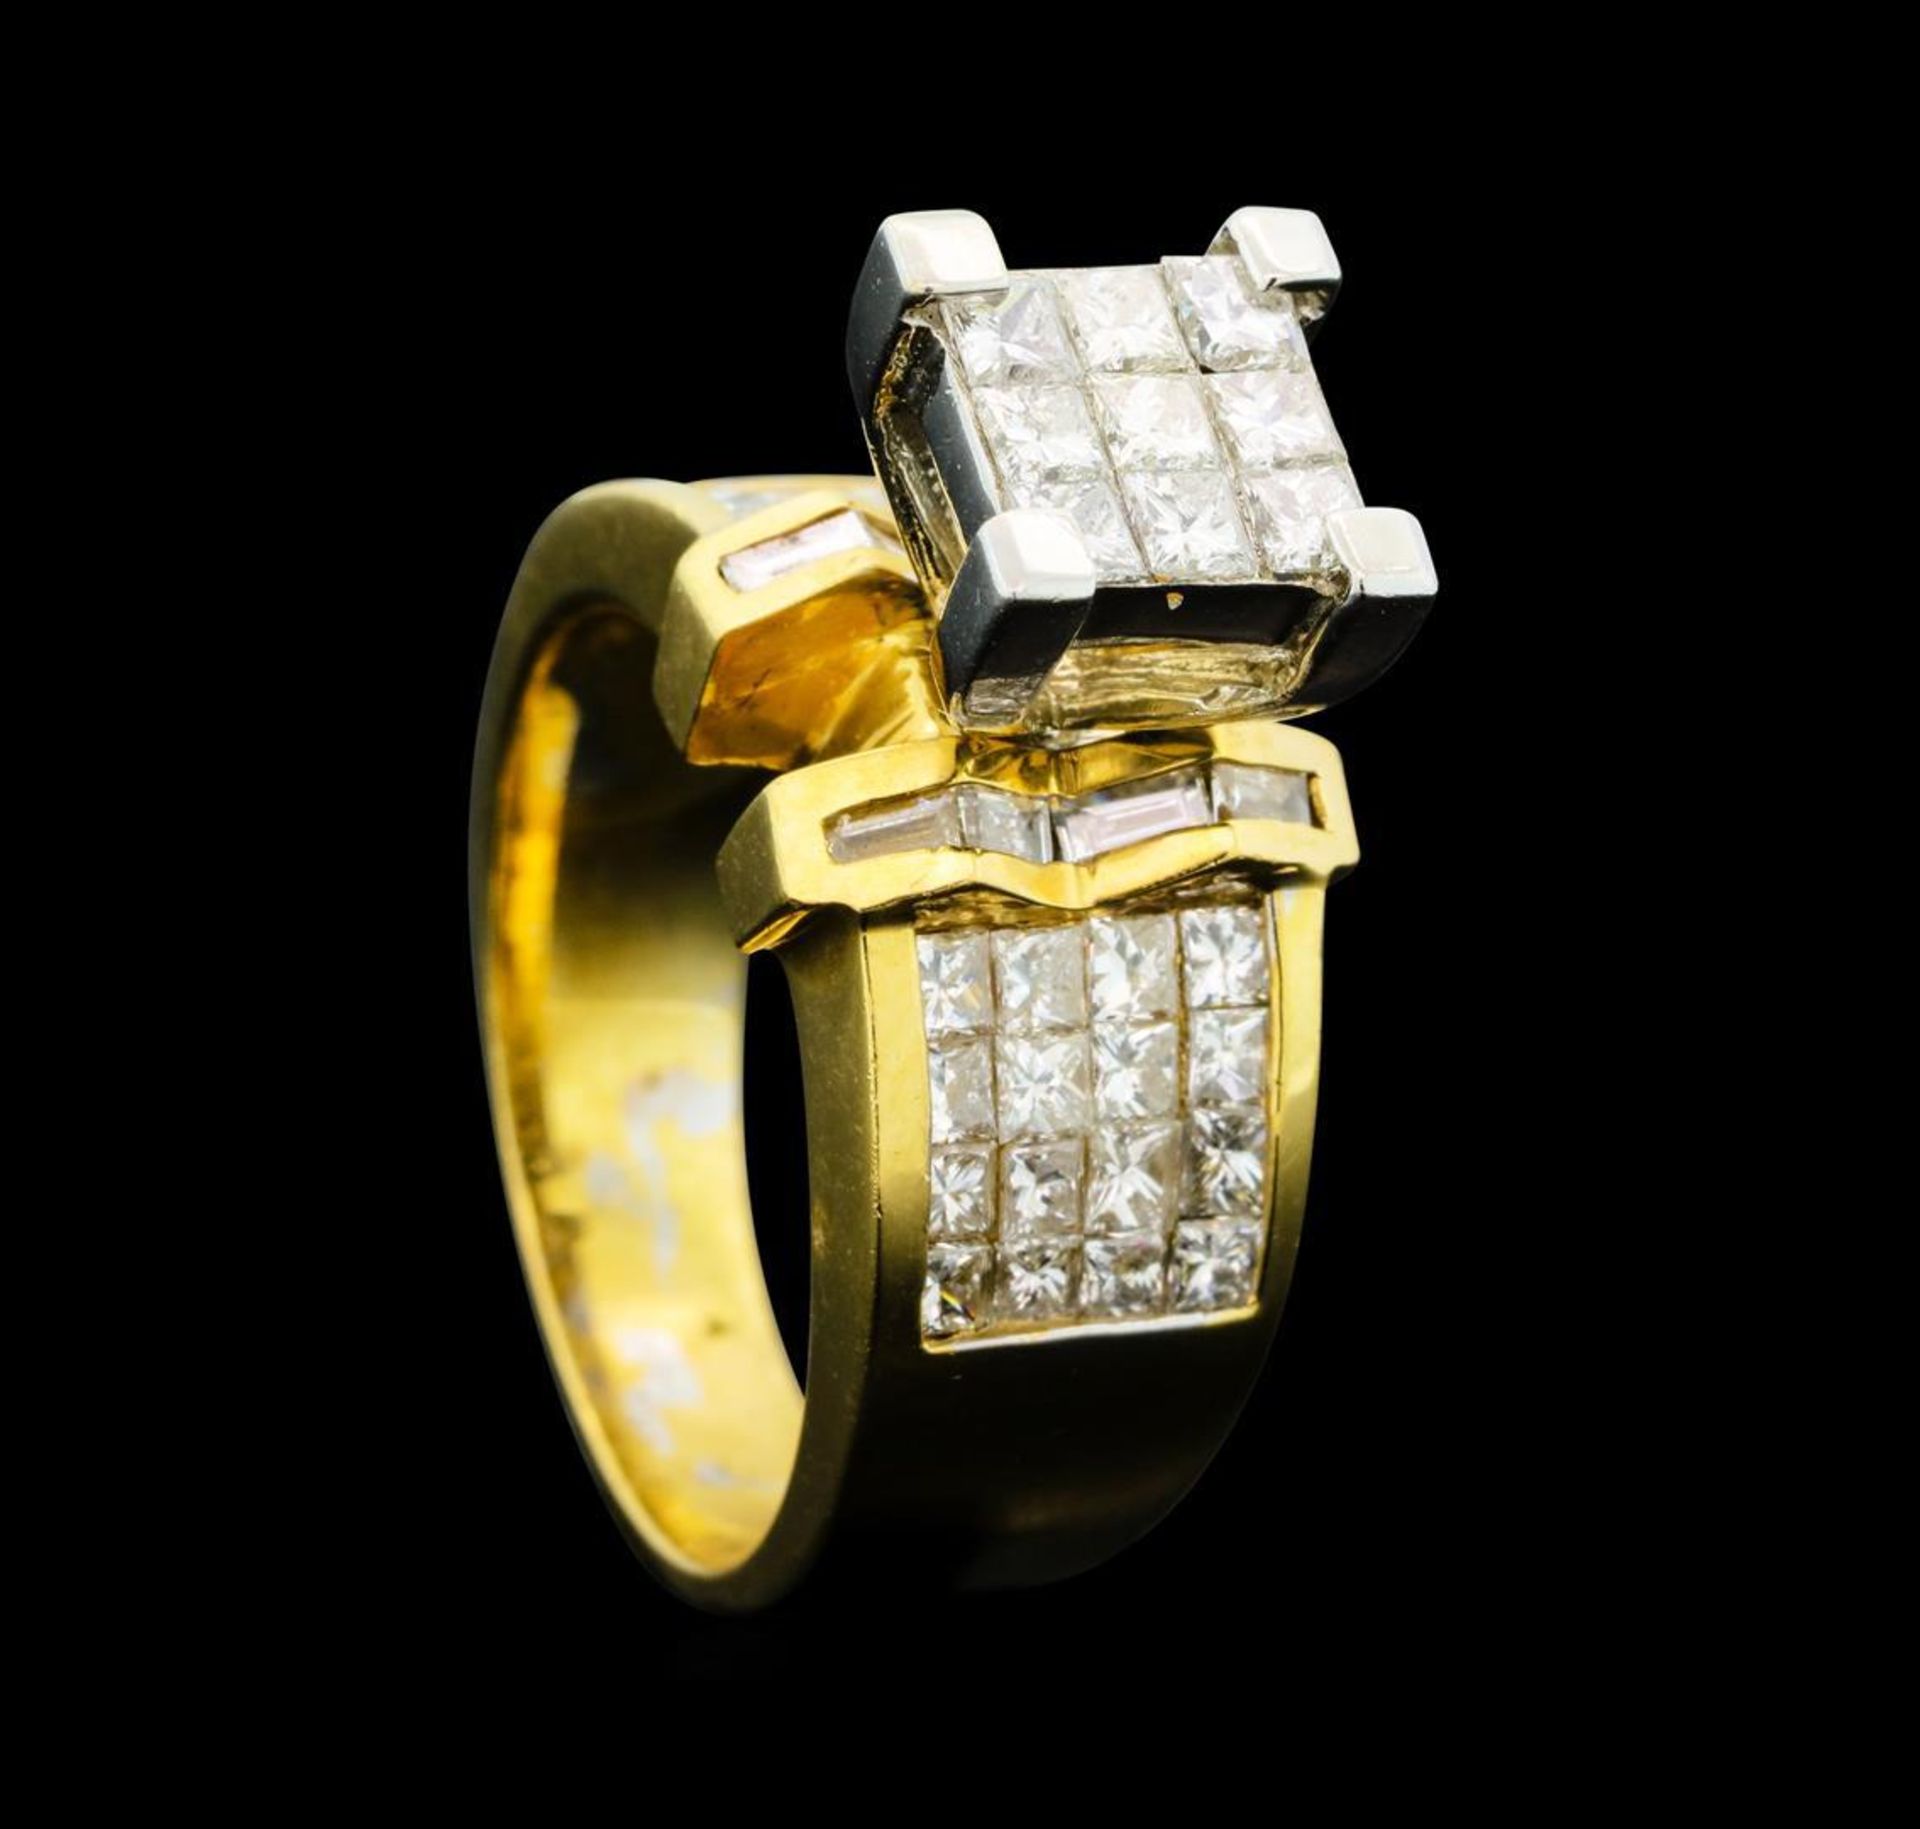 2.10 ctw Diamond Ring - 14KT Yellow And White Gold - Image 4 of 5